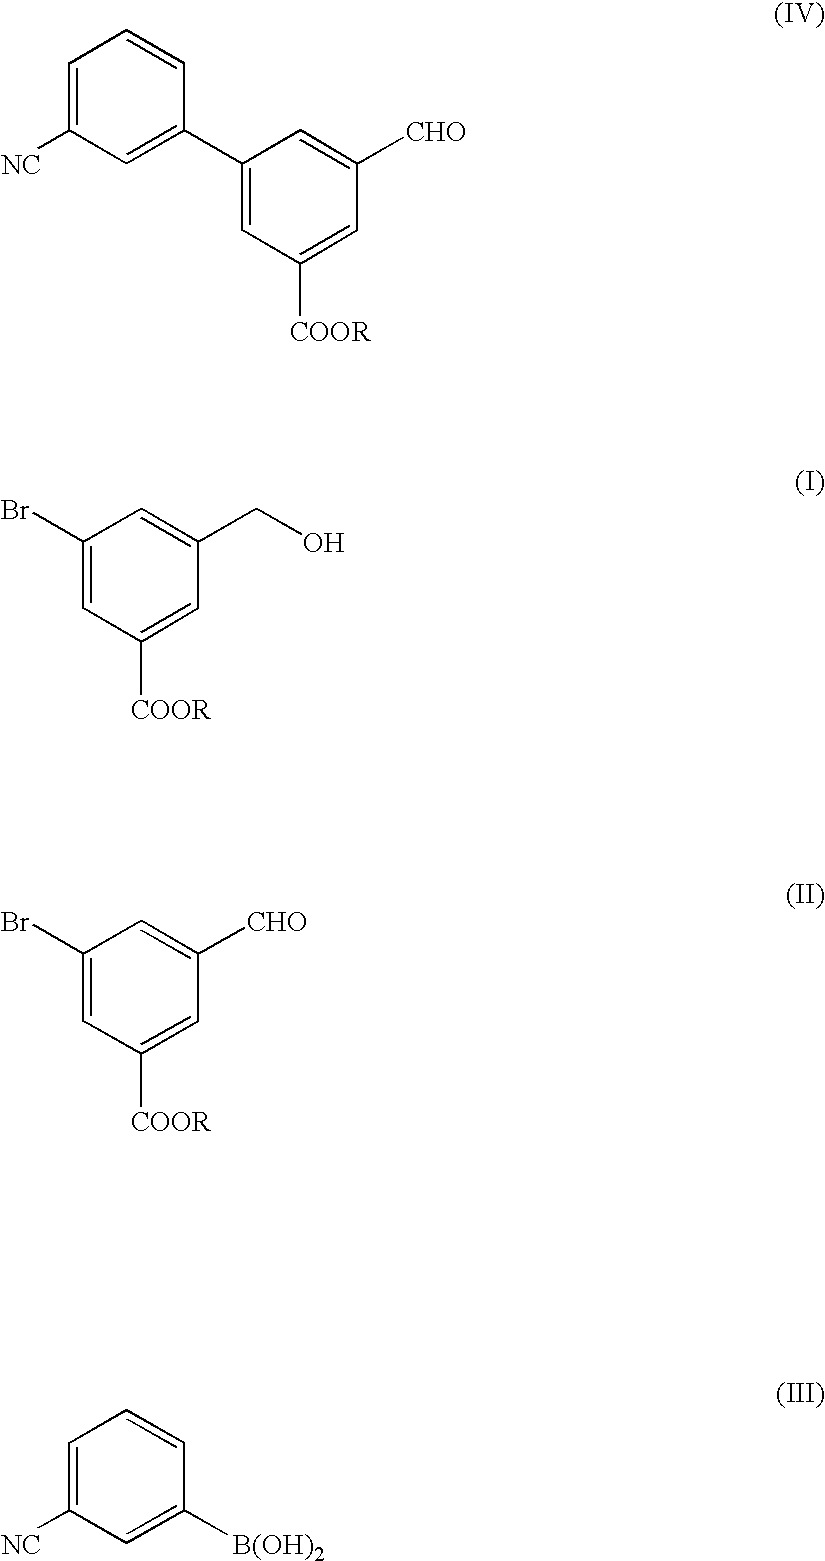 Process for producing 5-(3-cyanophenyl)-3-formylbenzoic acid compound